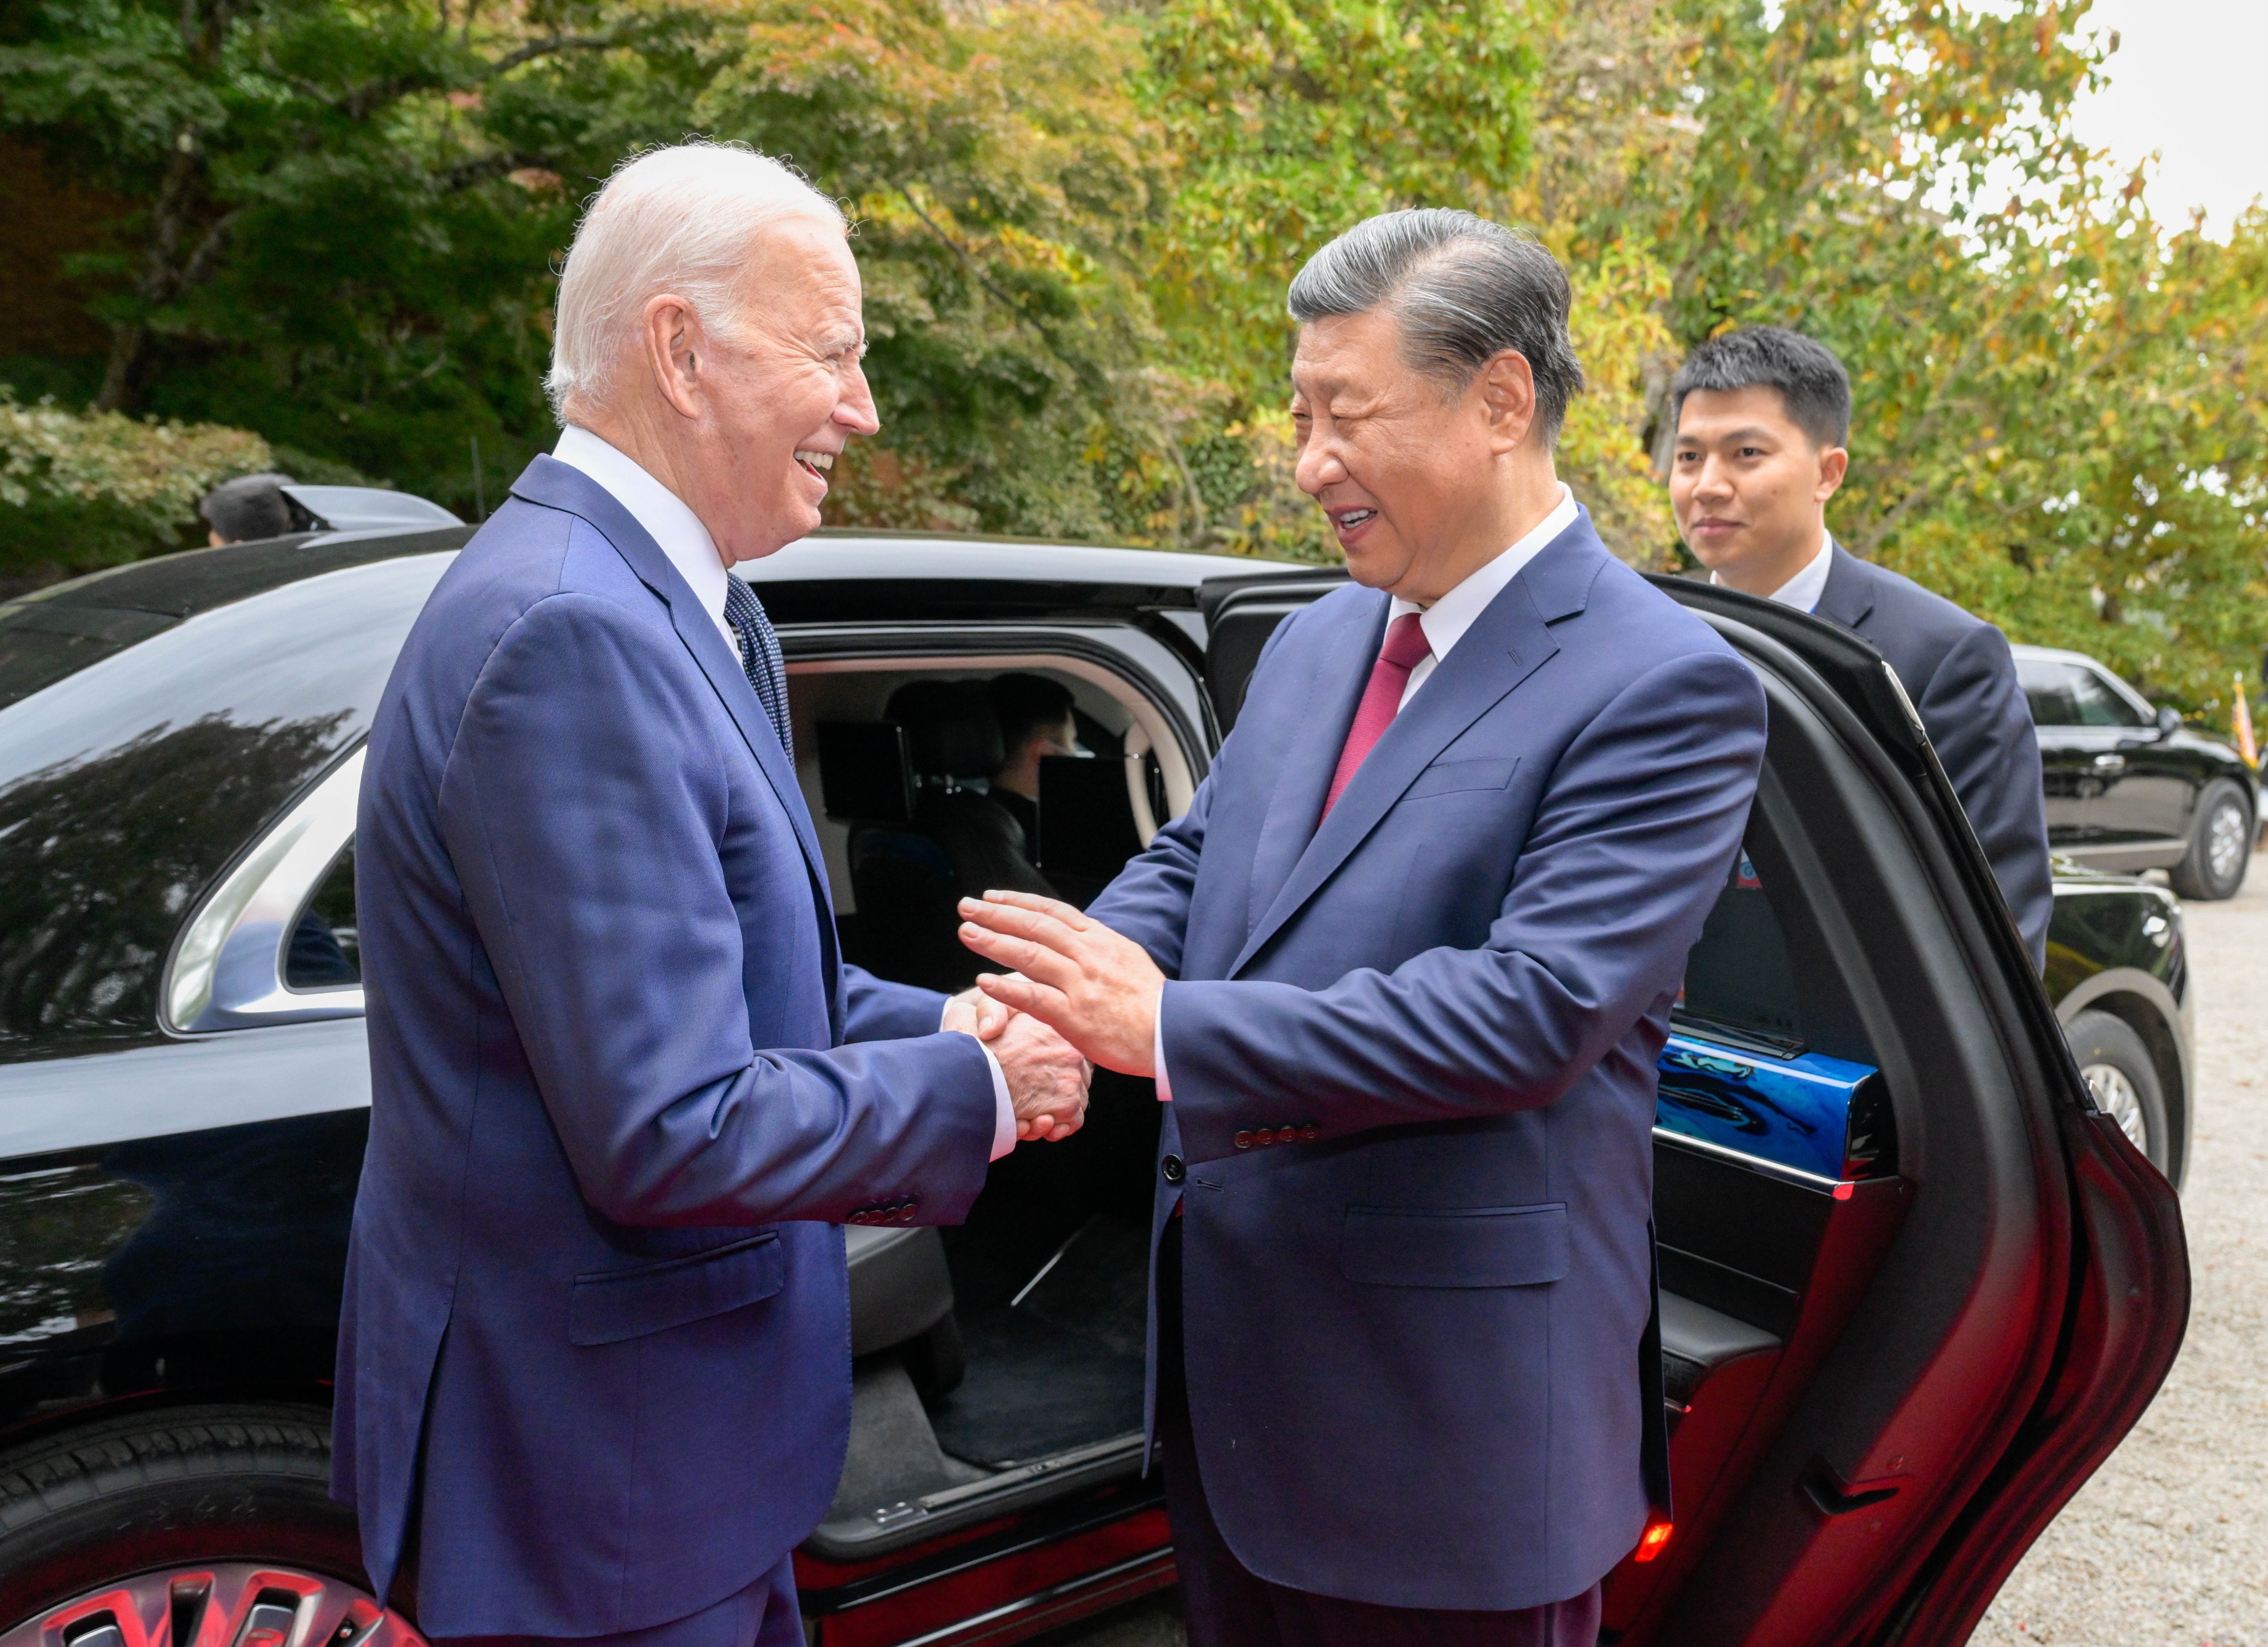 US President Joe Biden escorts Chinese President Xi Jinping to his car to bid him farewell after their talks in the Filoli estate in Woodside, south of San Francisco, California, on November 15. Photo: EPA-EFE 